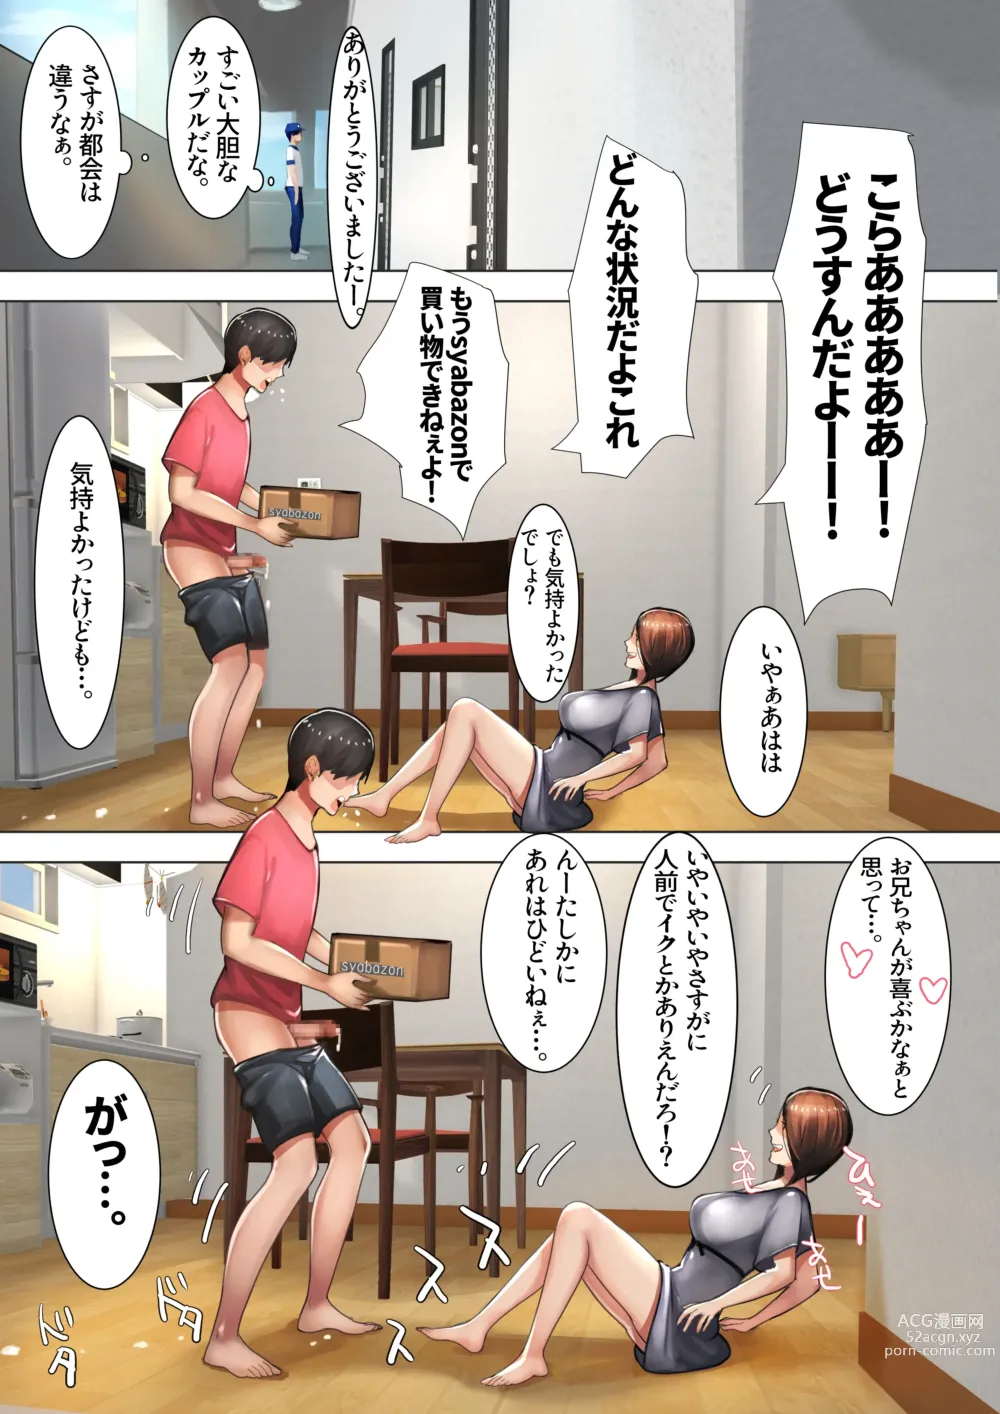 Page 6 of doujinshi Imouto SS (Short Story) vol.3